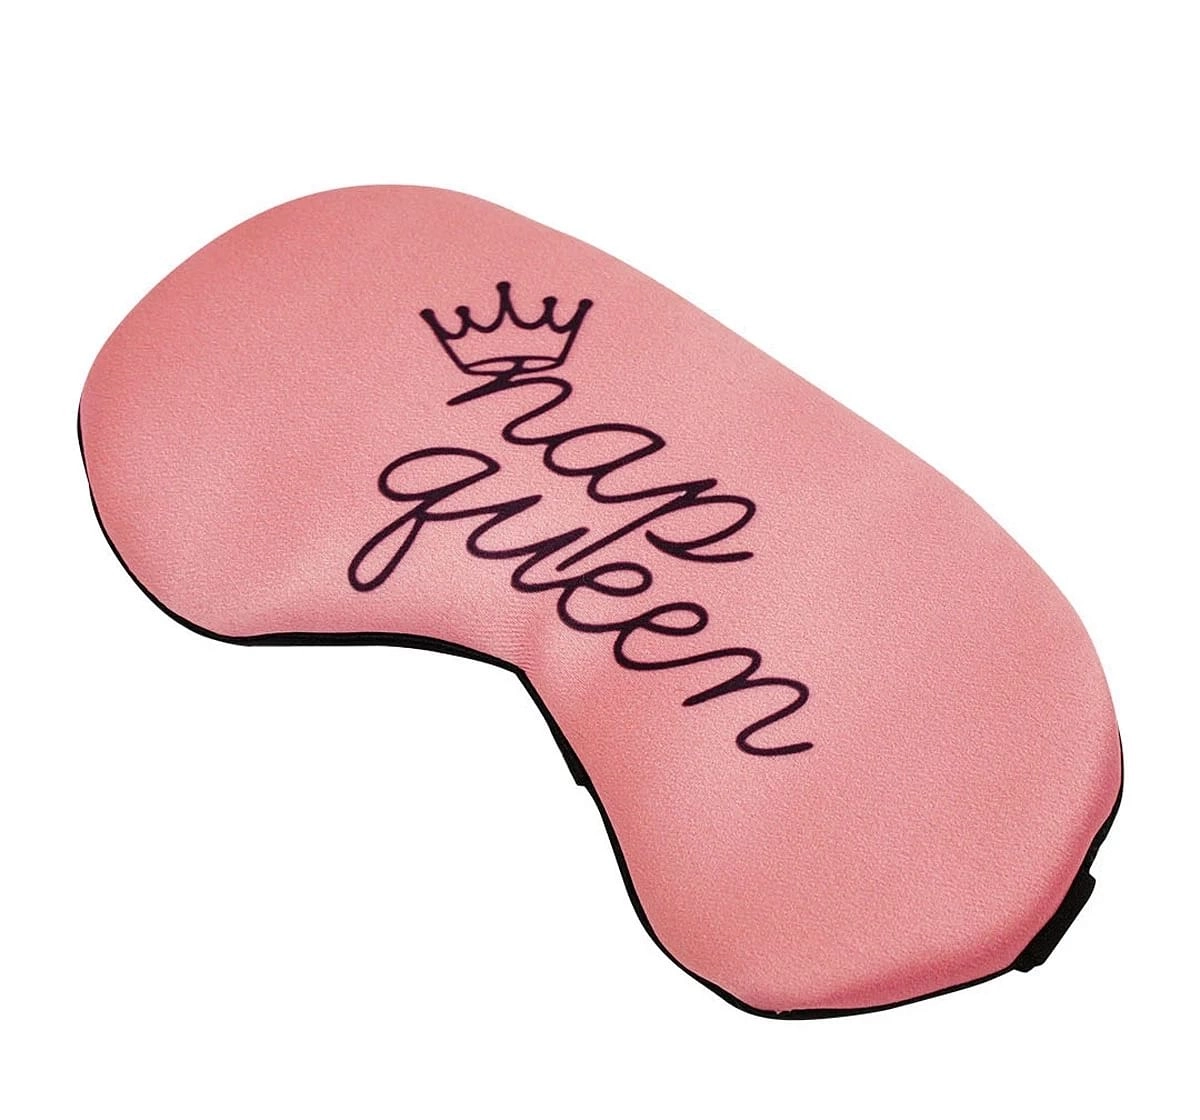 Luvley Nap Queen Printed Eye Mask/Sleep Mask For Relaxing, Medidation, Sleep, Travel For Girls & Kids, Pink, 3Y+